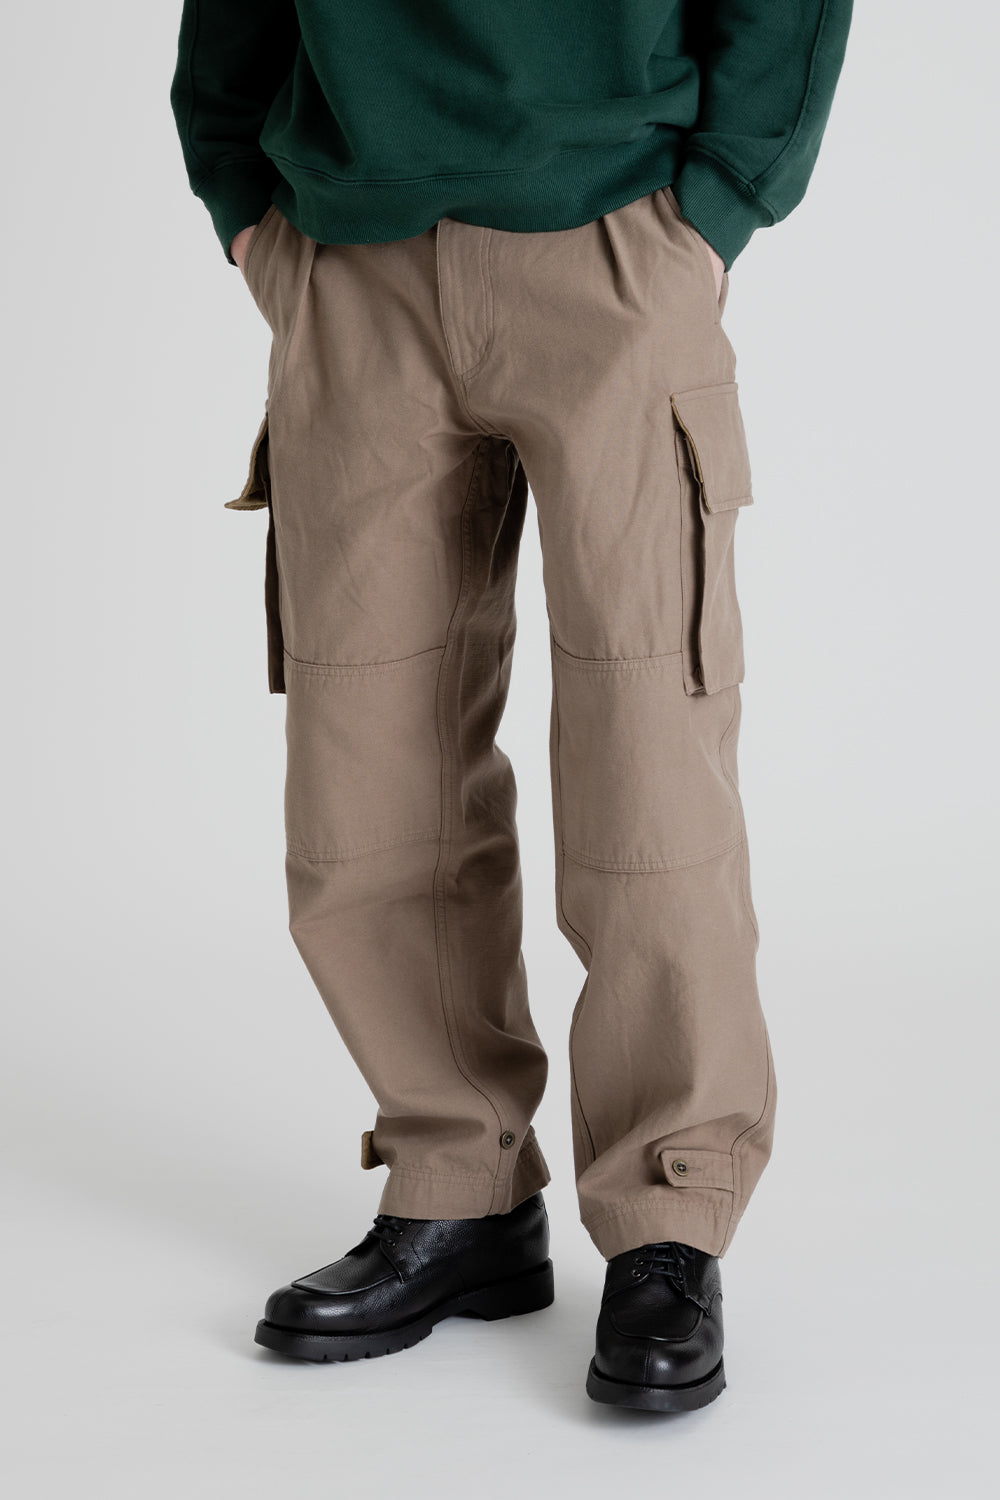 Frizmworks M47 French Army Pants in Stone Brown